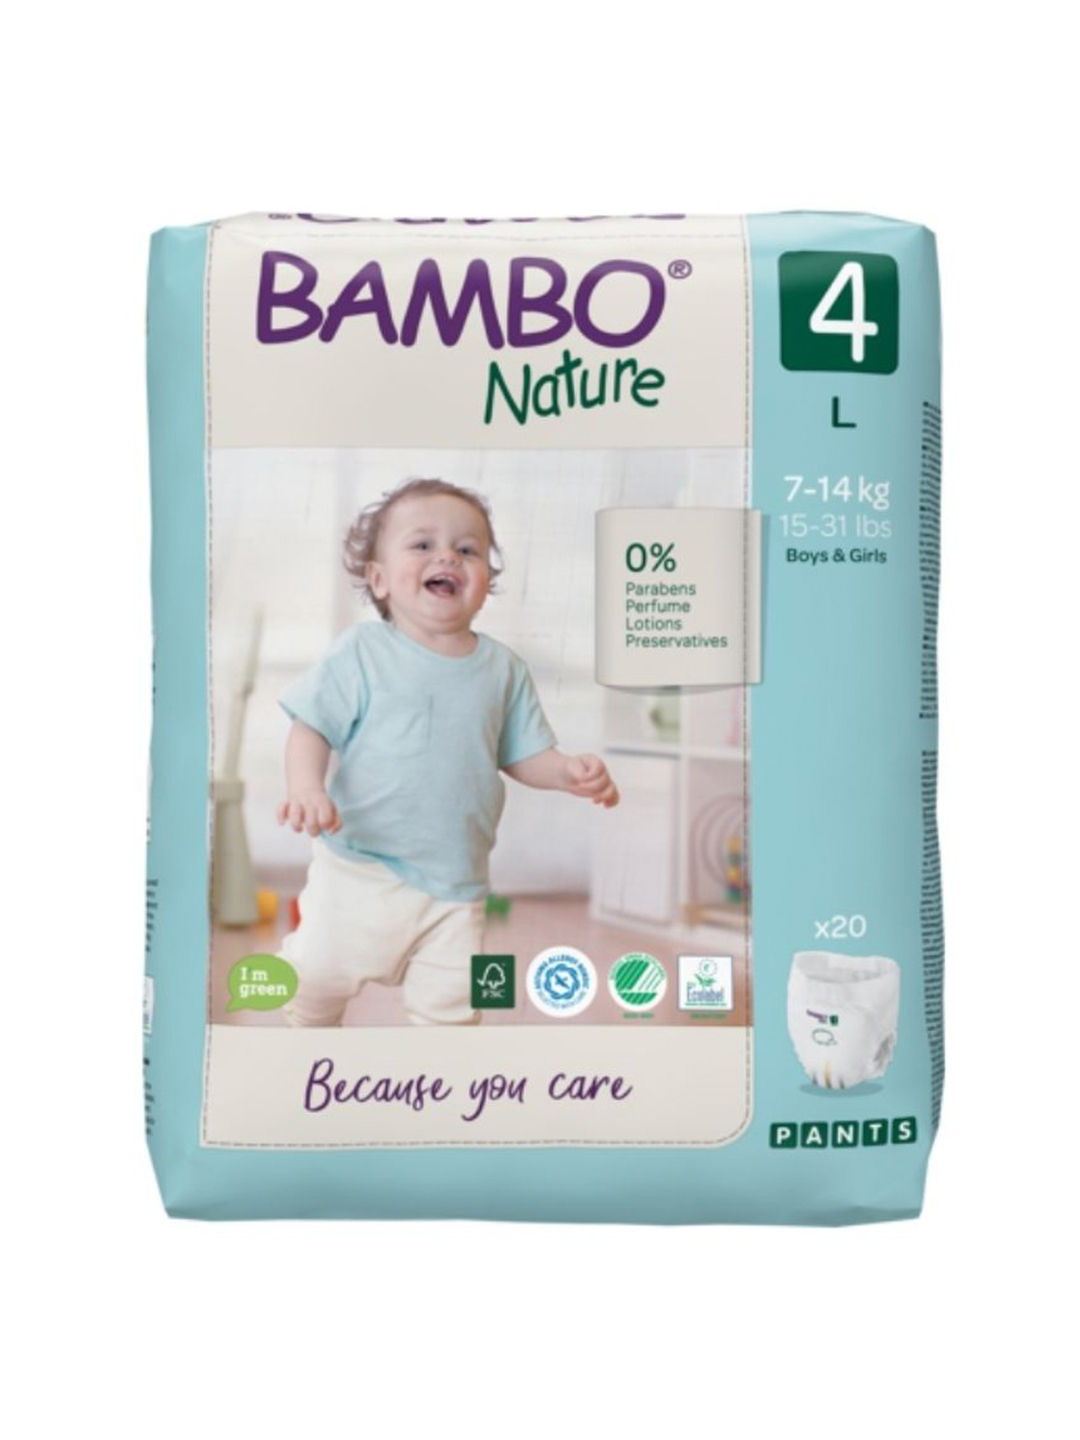 Bambo Nature Premium Baby Diapers - Pants Style, Large Size, 20 Count For Kids From 5-12 months